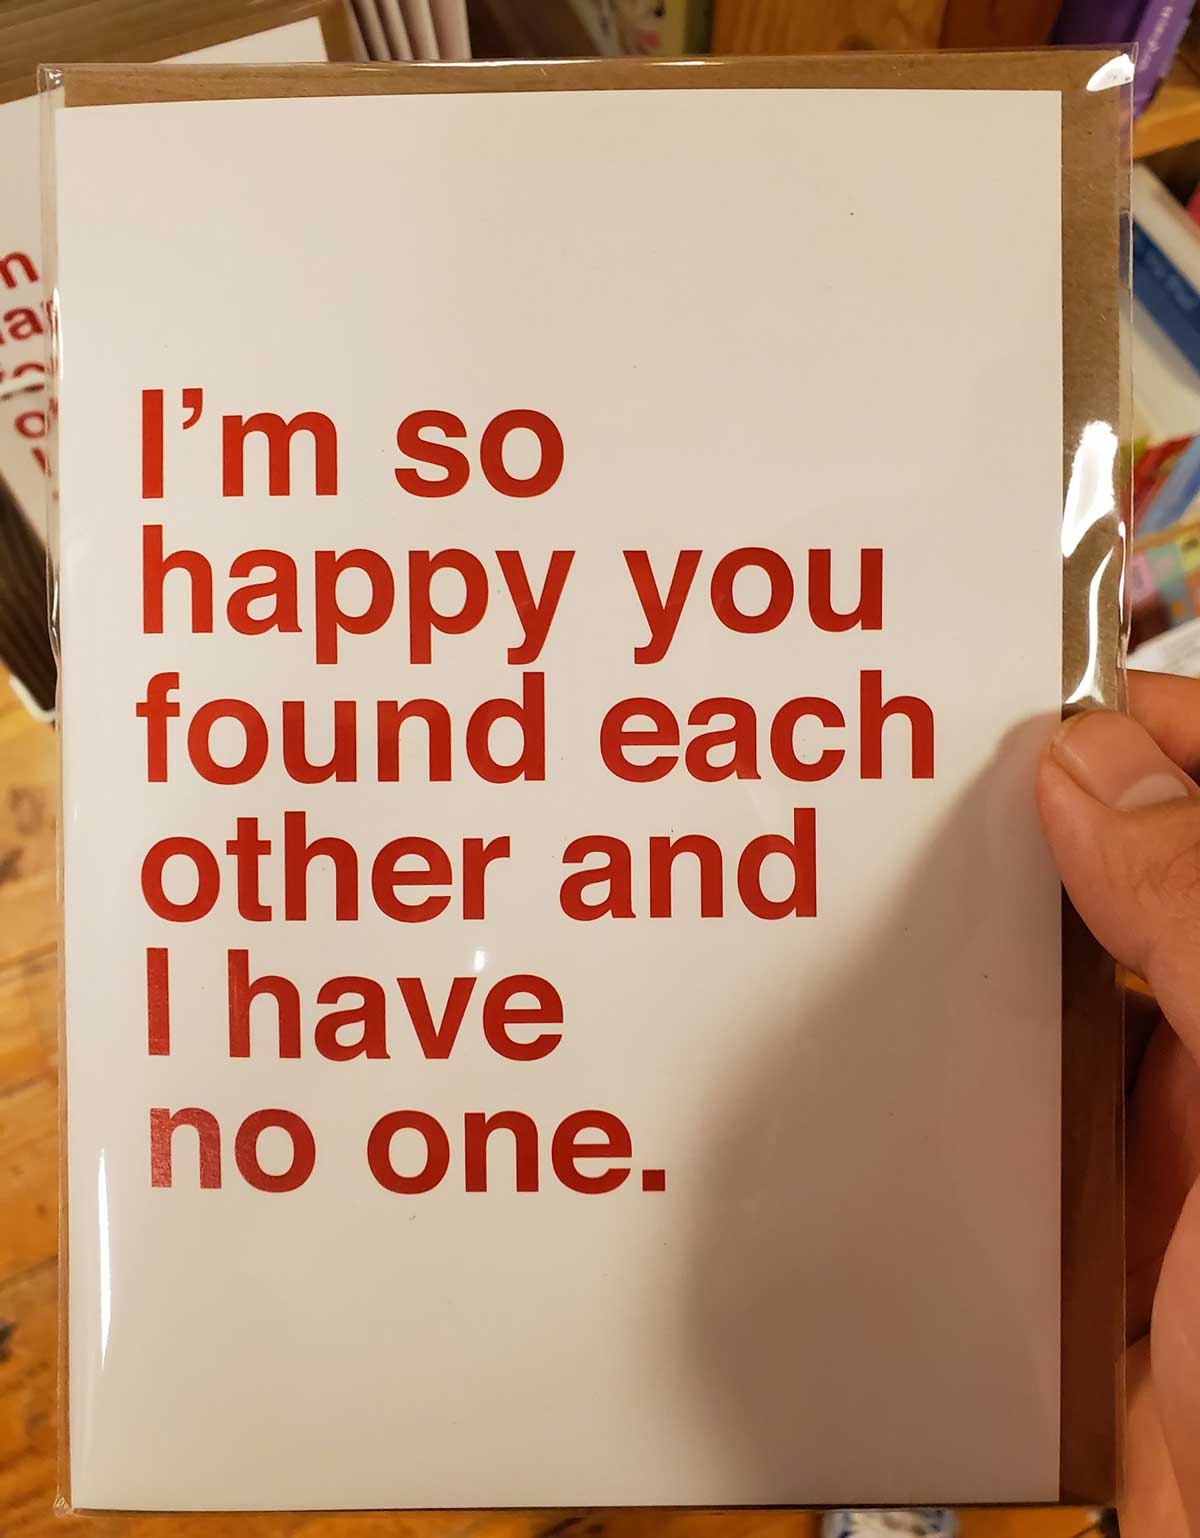 I've got a card ready for whenever wedding season is back on!